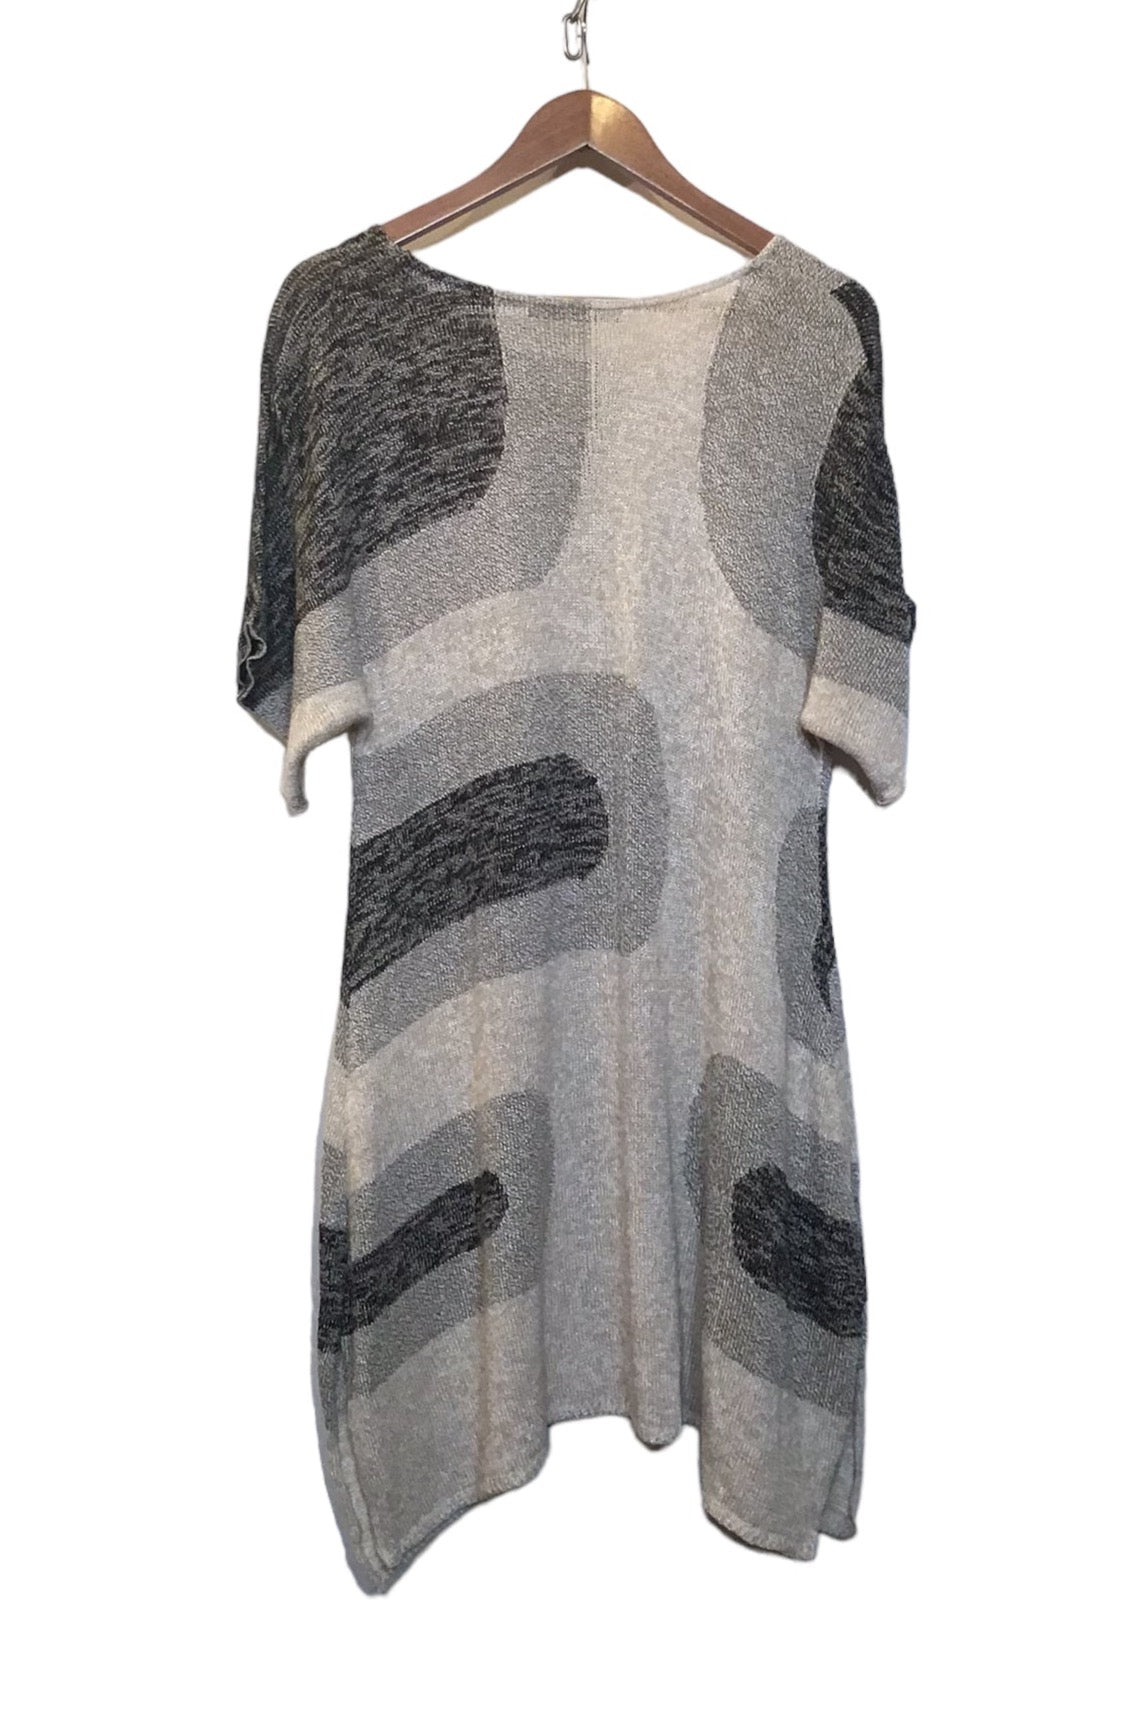 Sulu Knitted Dress (Size L)